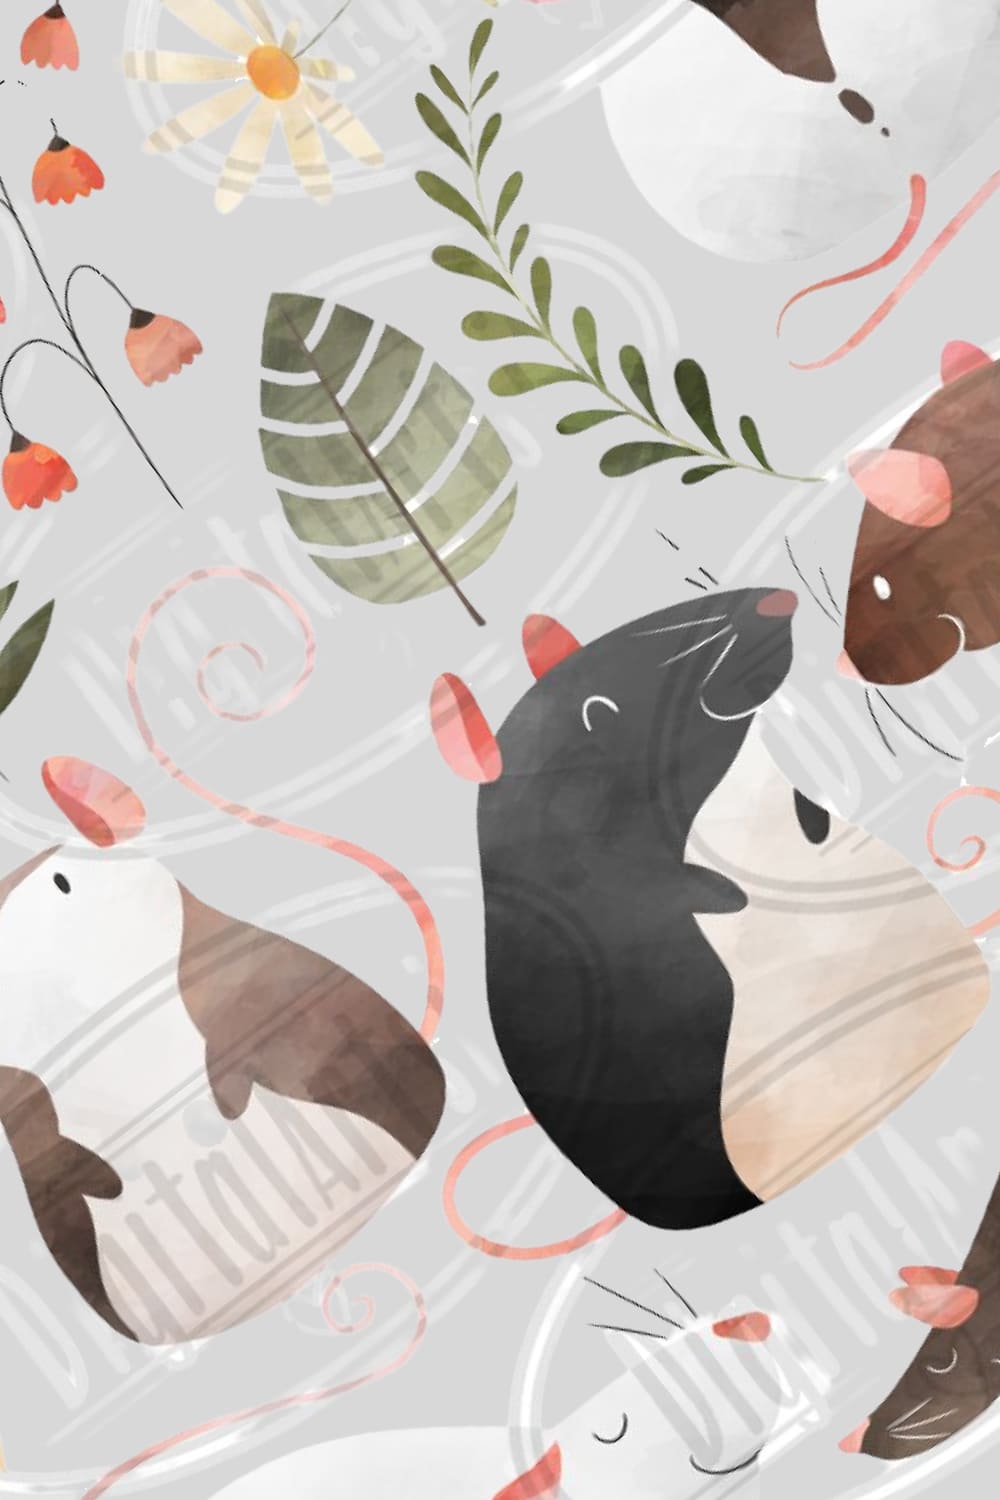 Cute rats in various available formats.